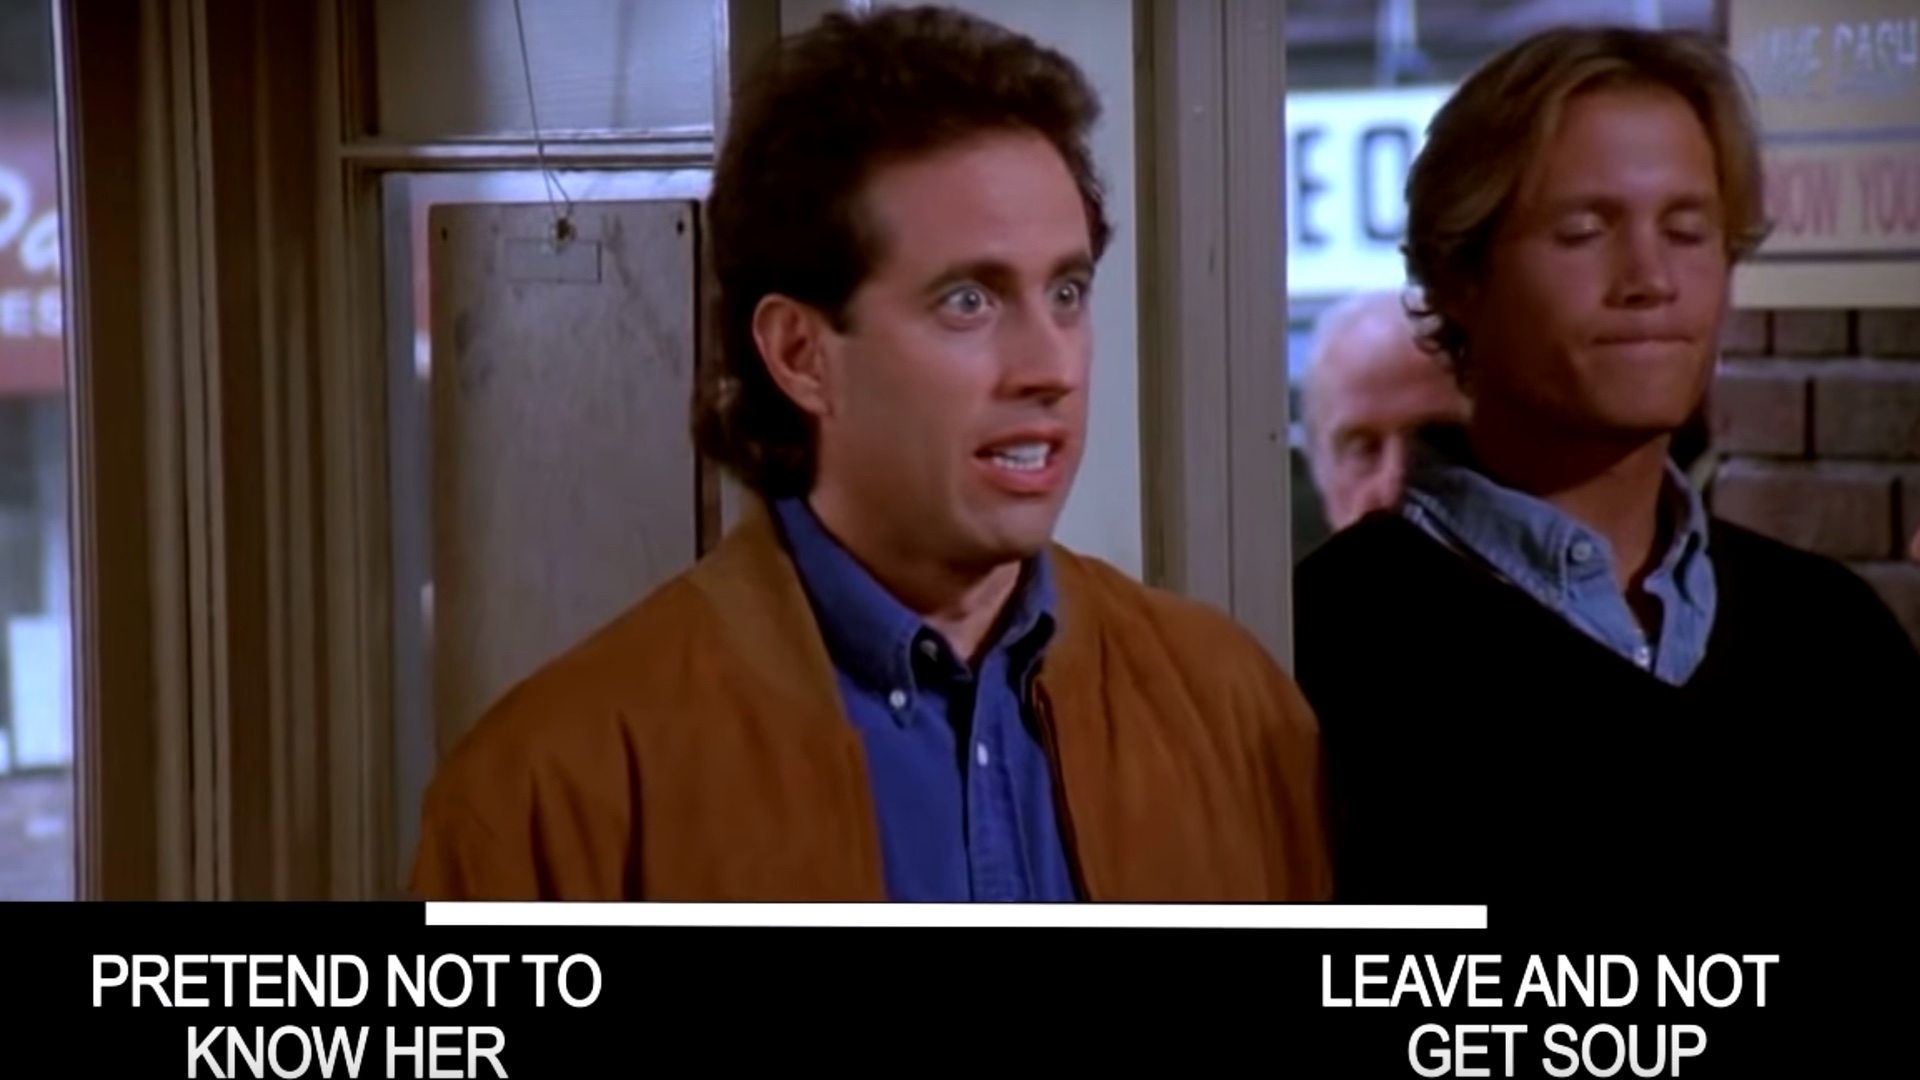 Fun Video Imagines What SEINFELD Would Be Like as an Interactive 